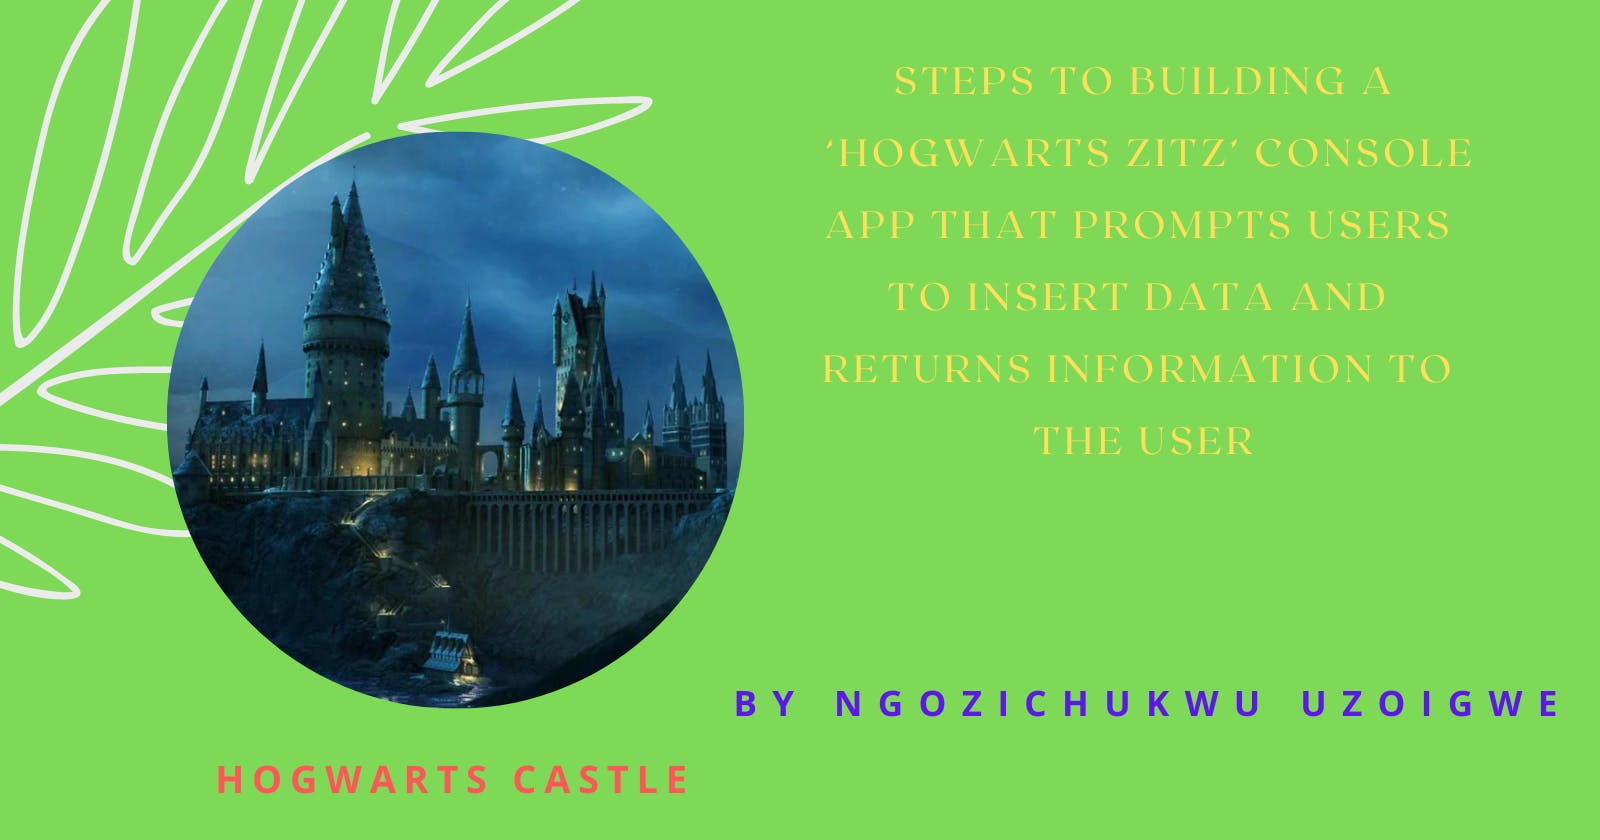 Article On Steps To Building A ‘Hogwarts Zitz’ Console App That Prompts Users To Insert Data And Returns Information To The User